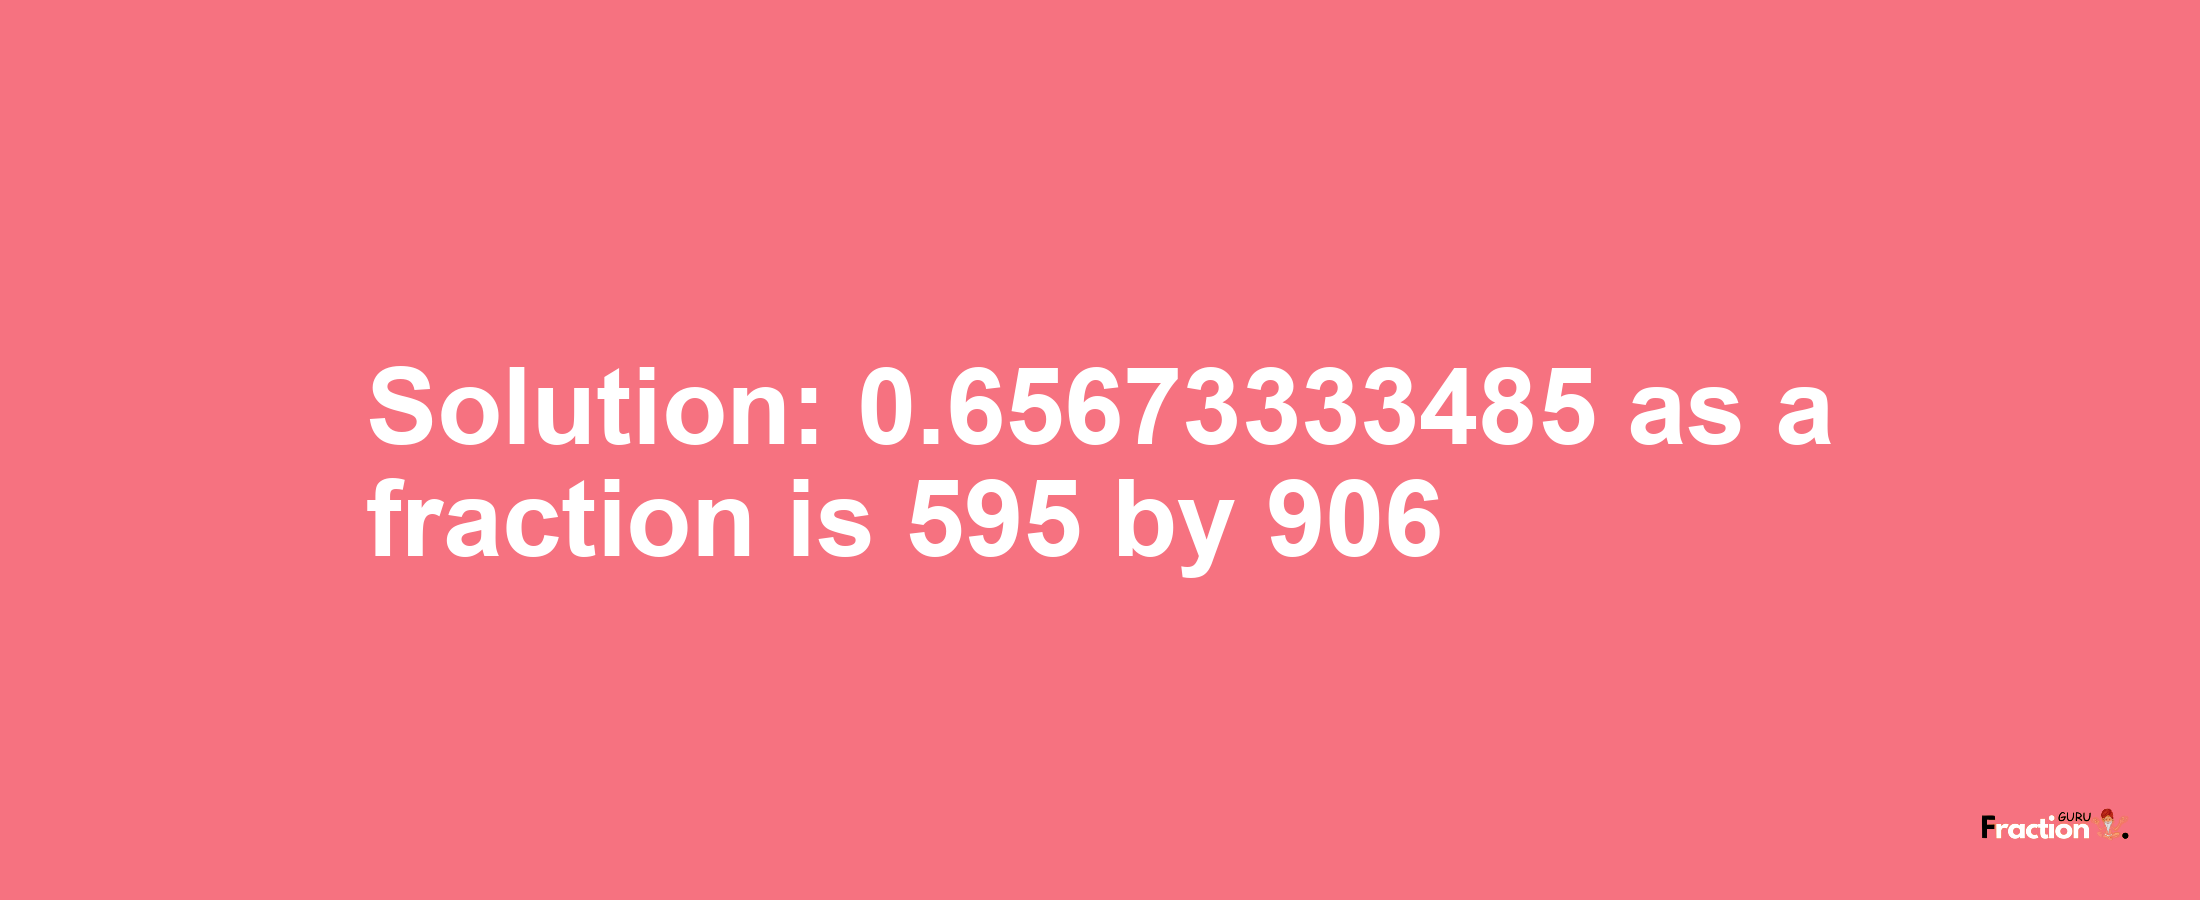 Solution:0.65673333485 as a fraction is 595/906